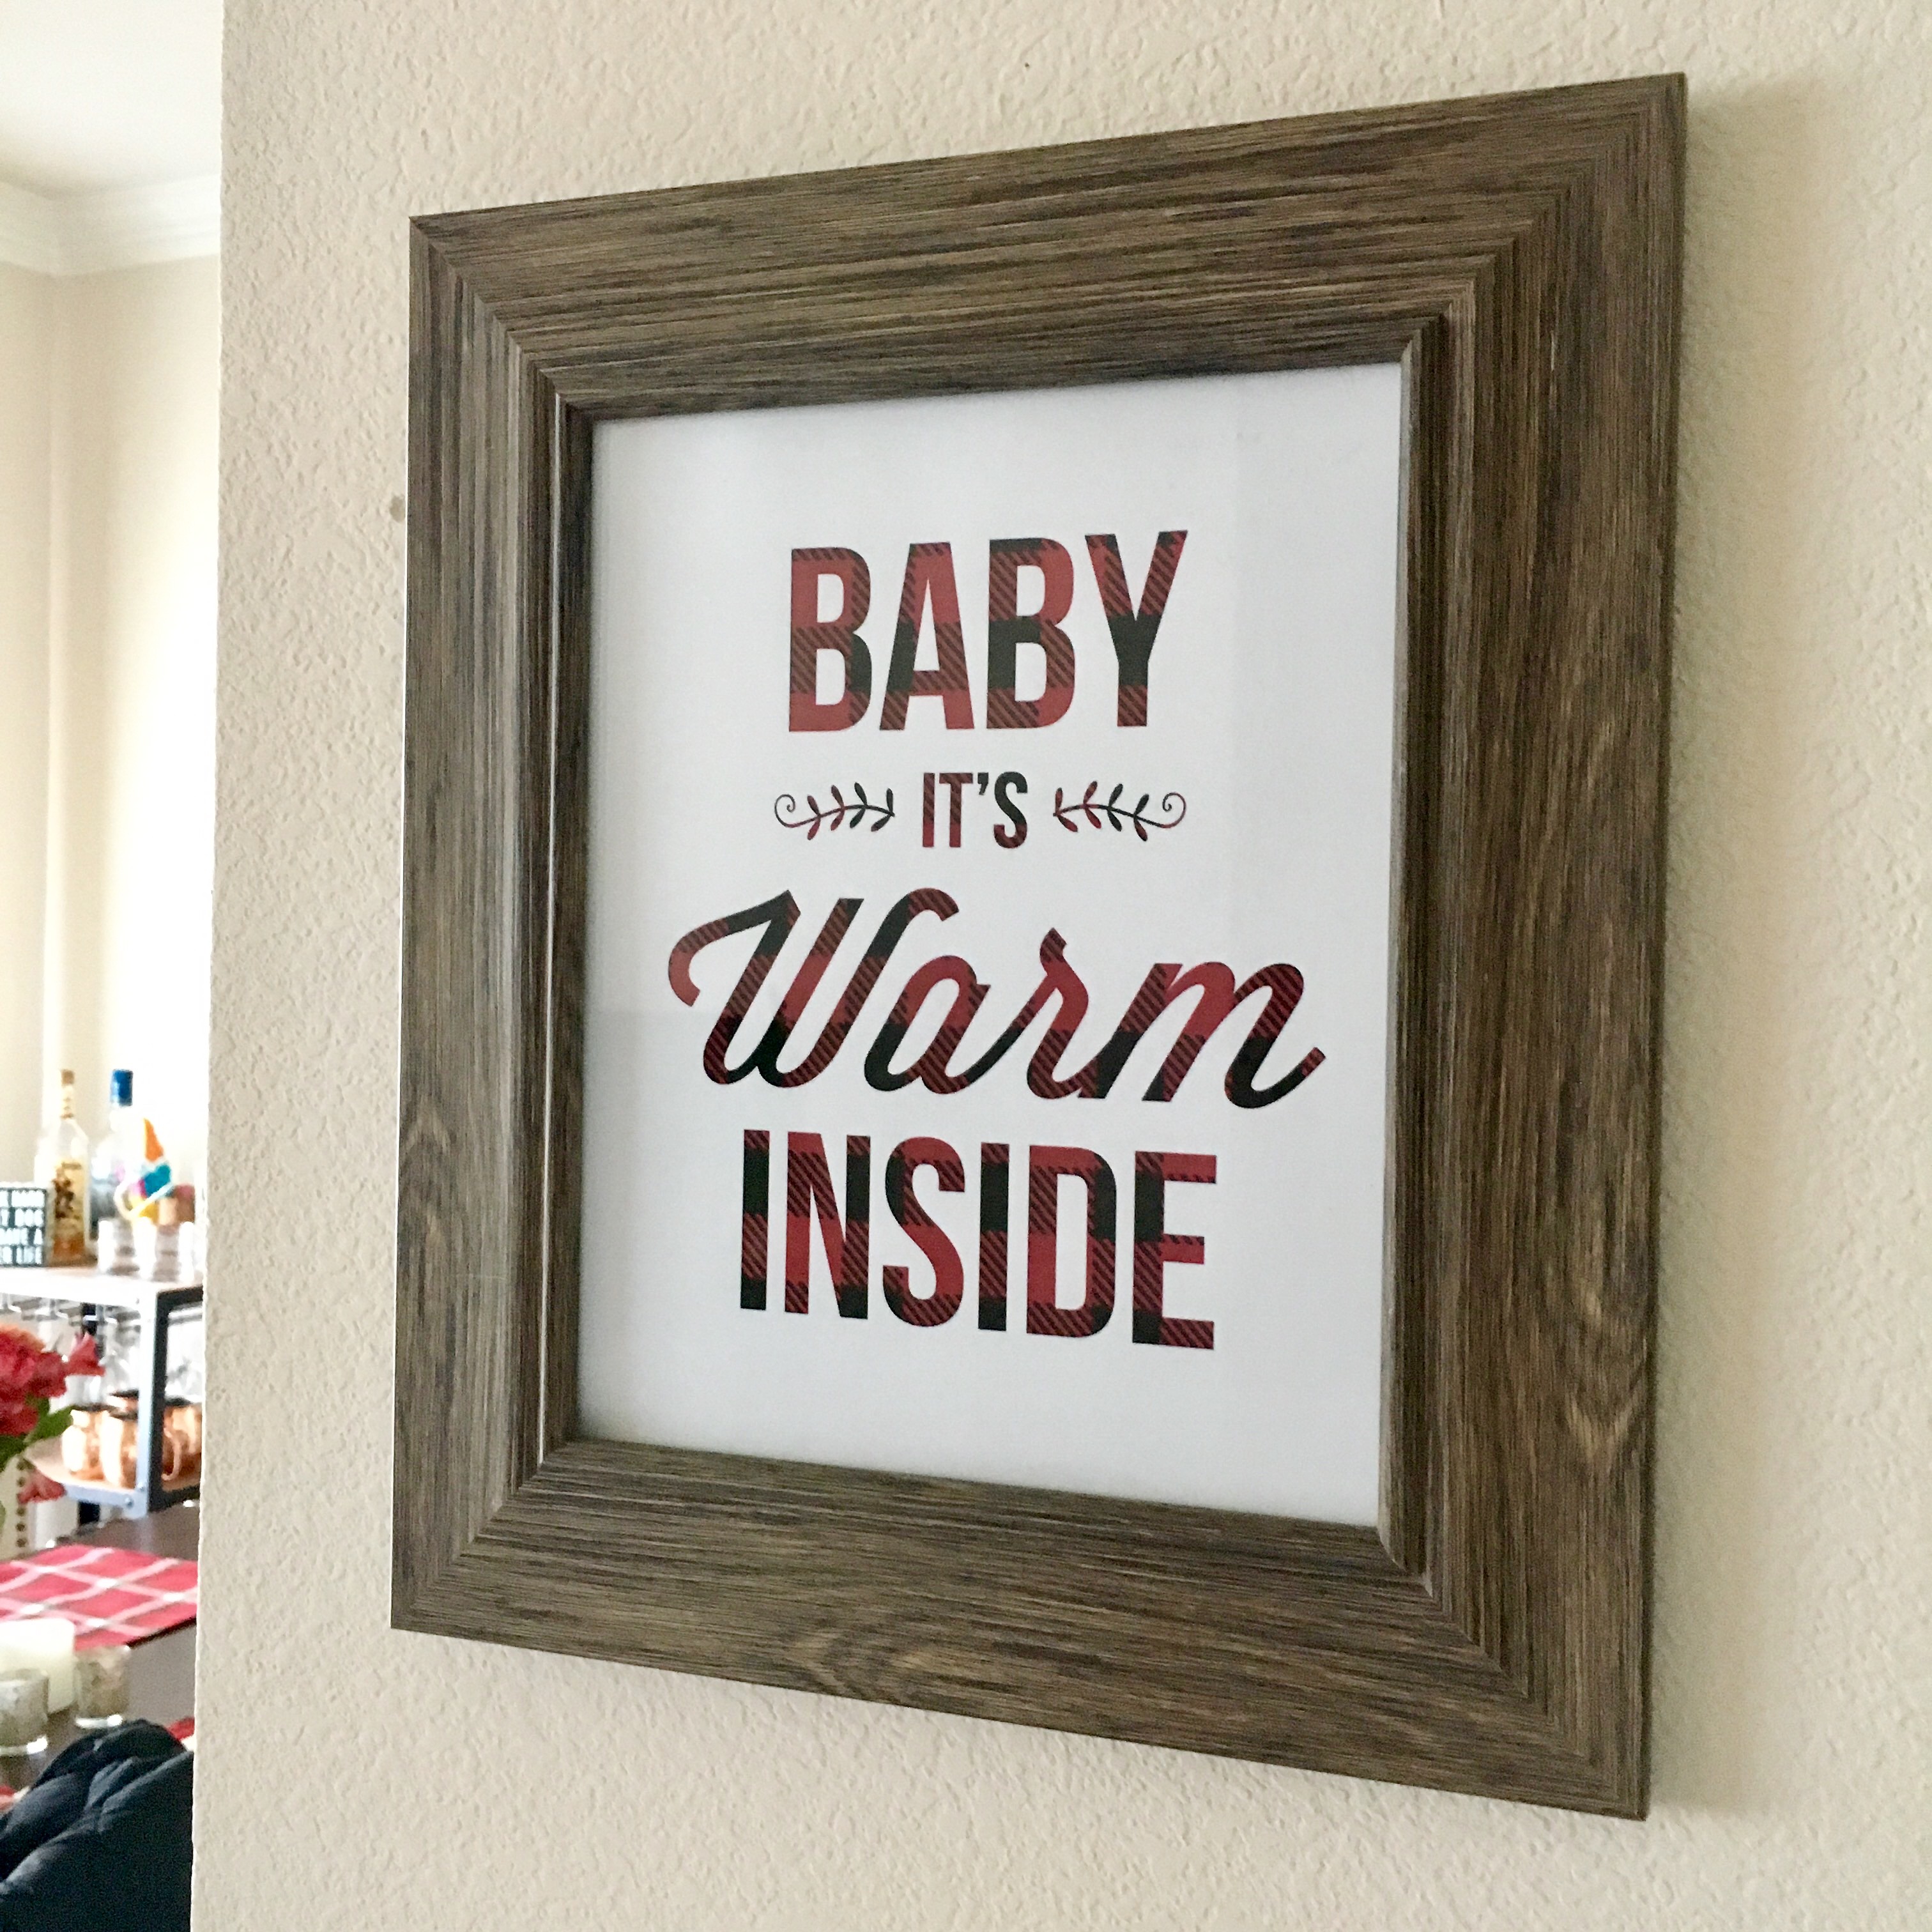 Baby It's Warm Inside Printable | The Frankson Family